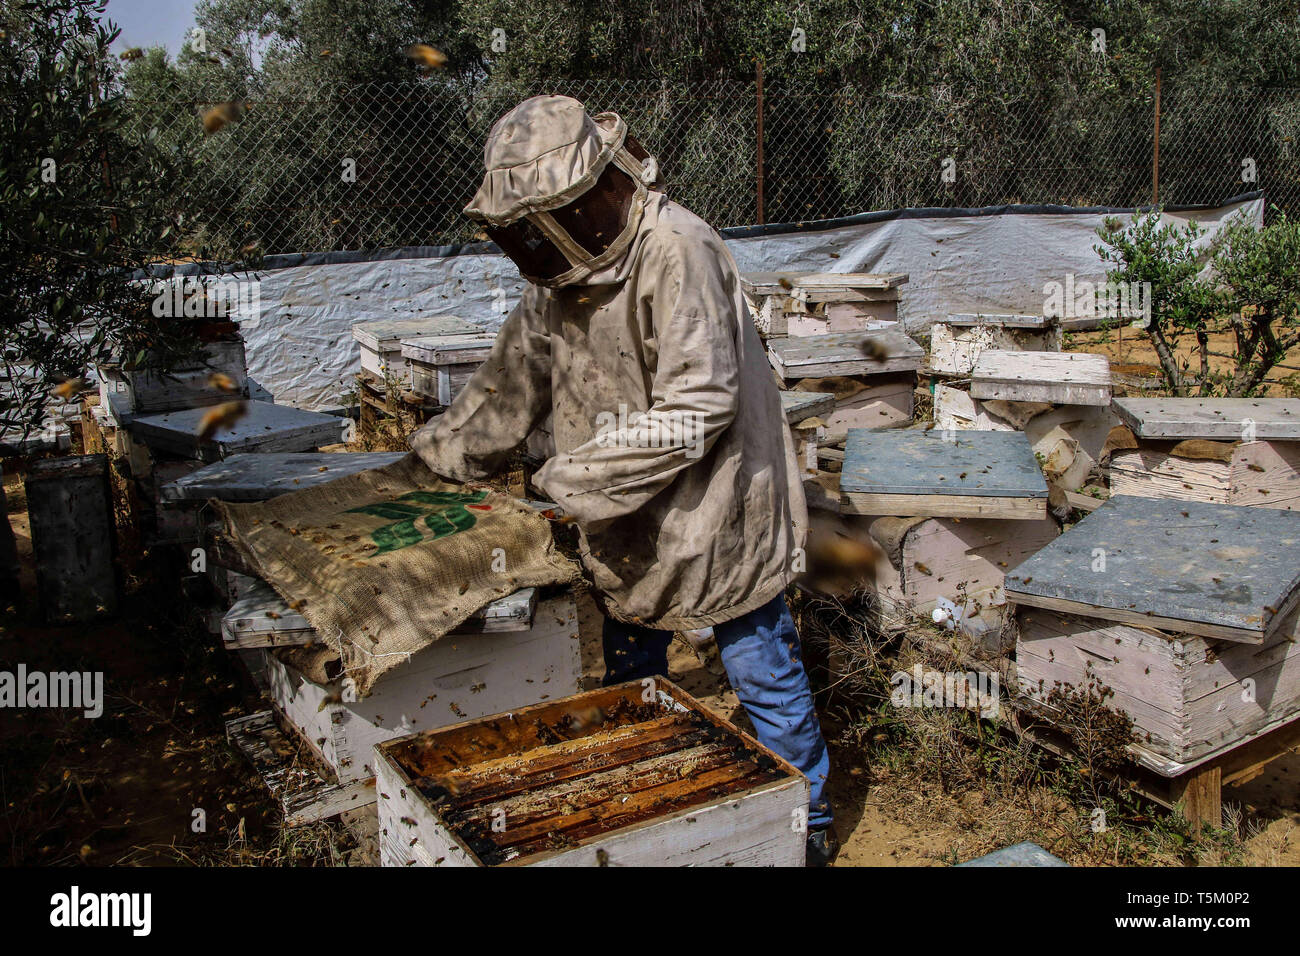 Gaza, Palestine. 25th Apr 2019. Palestinian farmer Talal Hamdan Abu Rouk and his wife Jihad collect honey from the racks of their beehives in the Khuza'a village in the eastern part of Khan Younis in the southern Gaza strip. Tala and Jihad have been looking after their apiary during the last ten years, although their beehives have faced much destruction during the recent Israeli attacks on Gaza. Credit: ZUMA Press, Inc./Alamy Live News Stock Photo